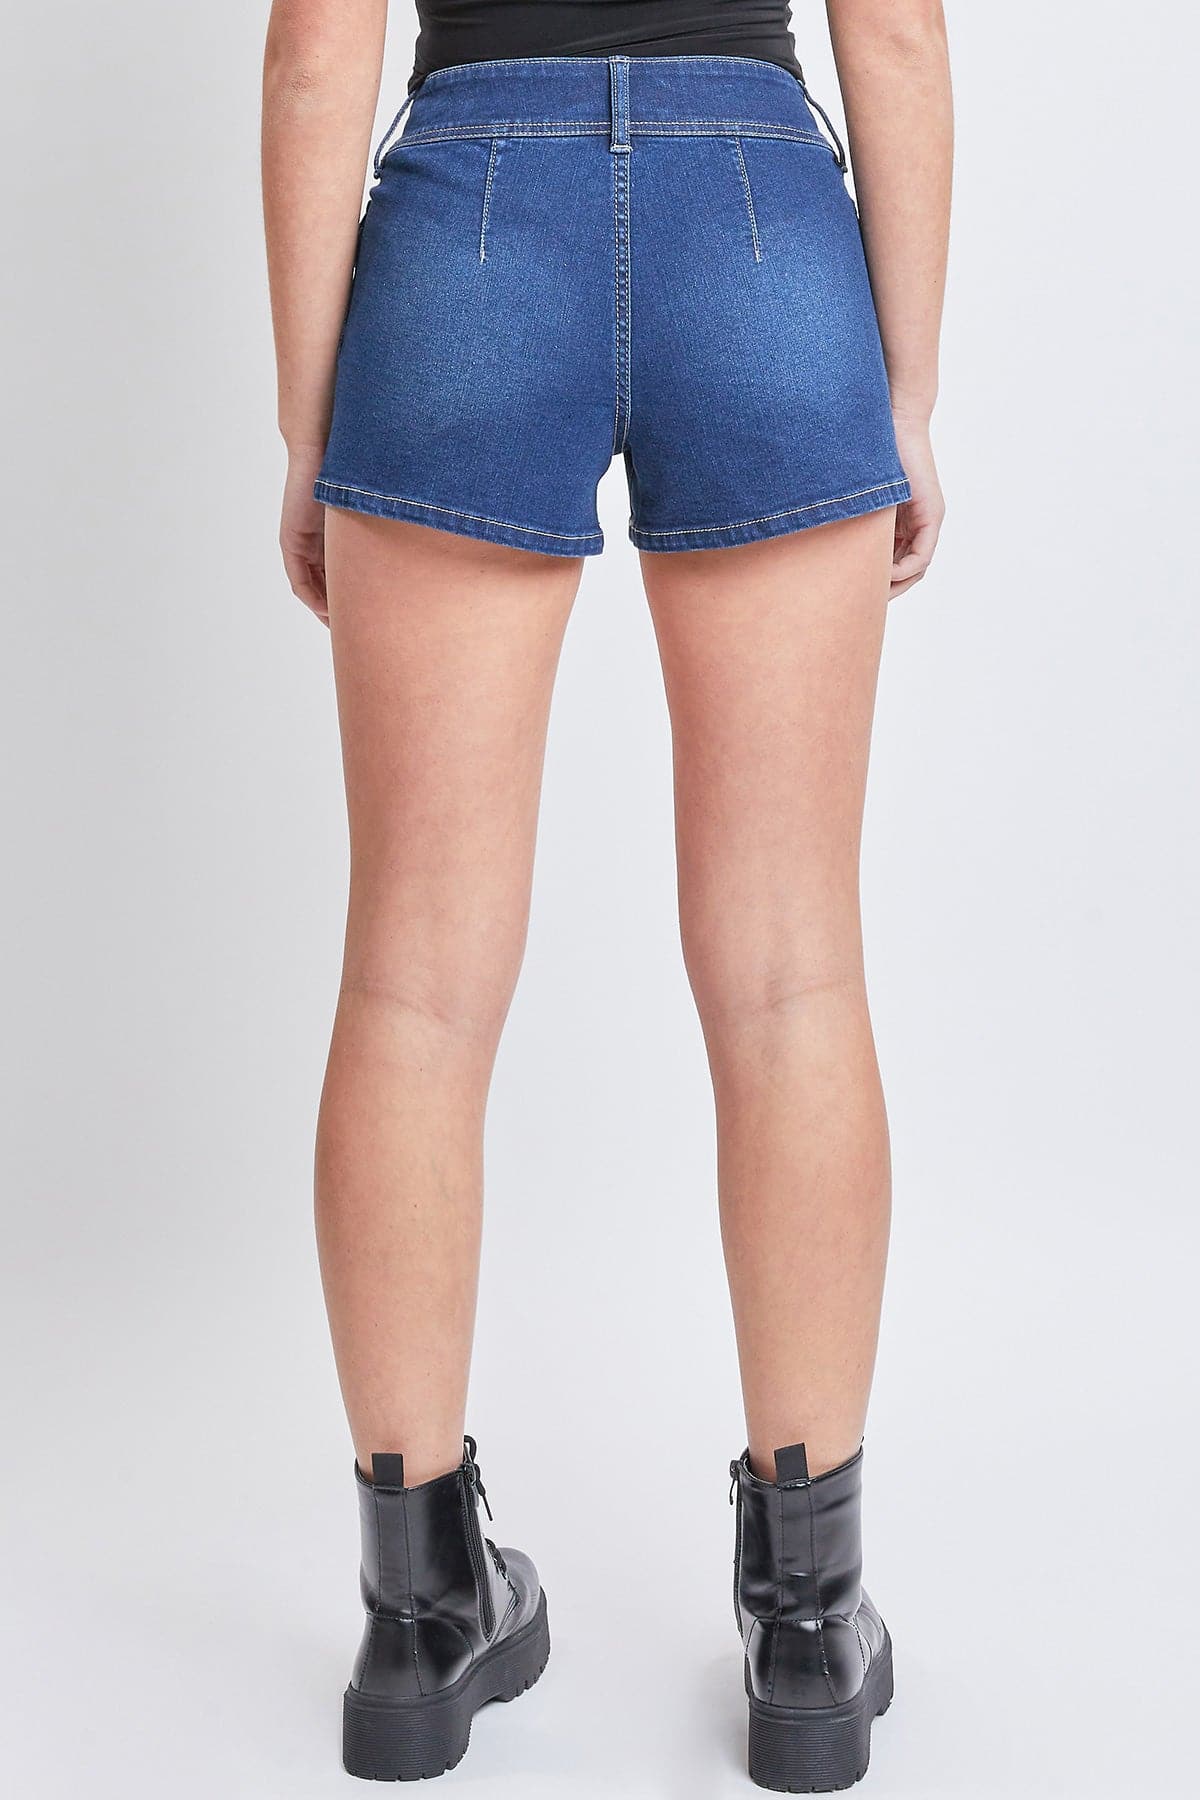 Women's Low Rise Denim Shorts with Side Patch Pockets